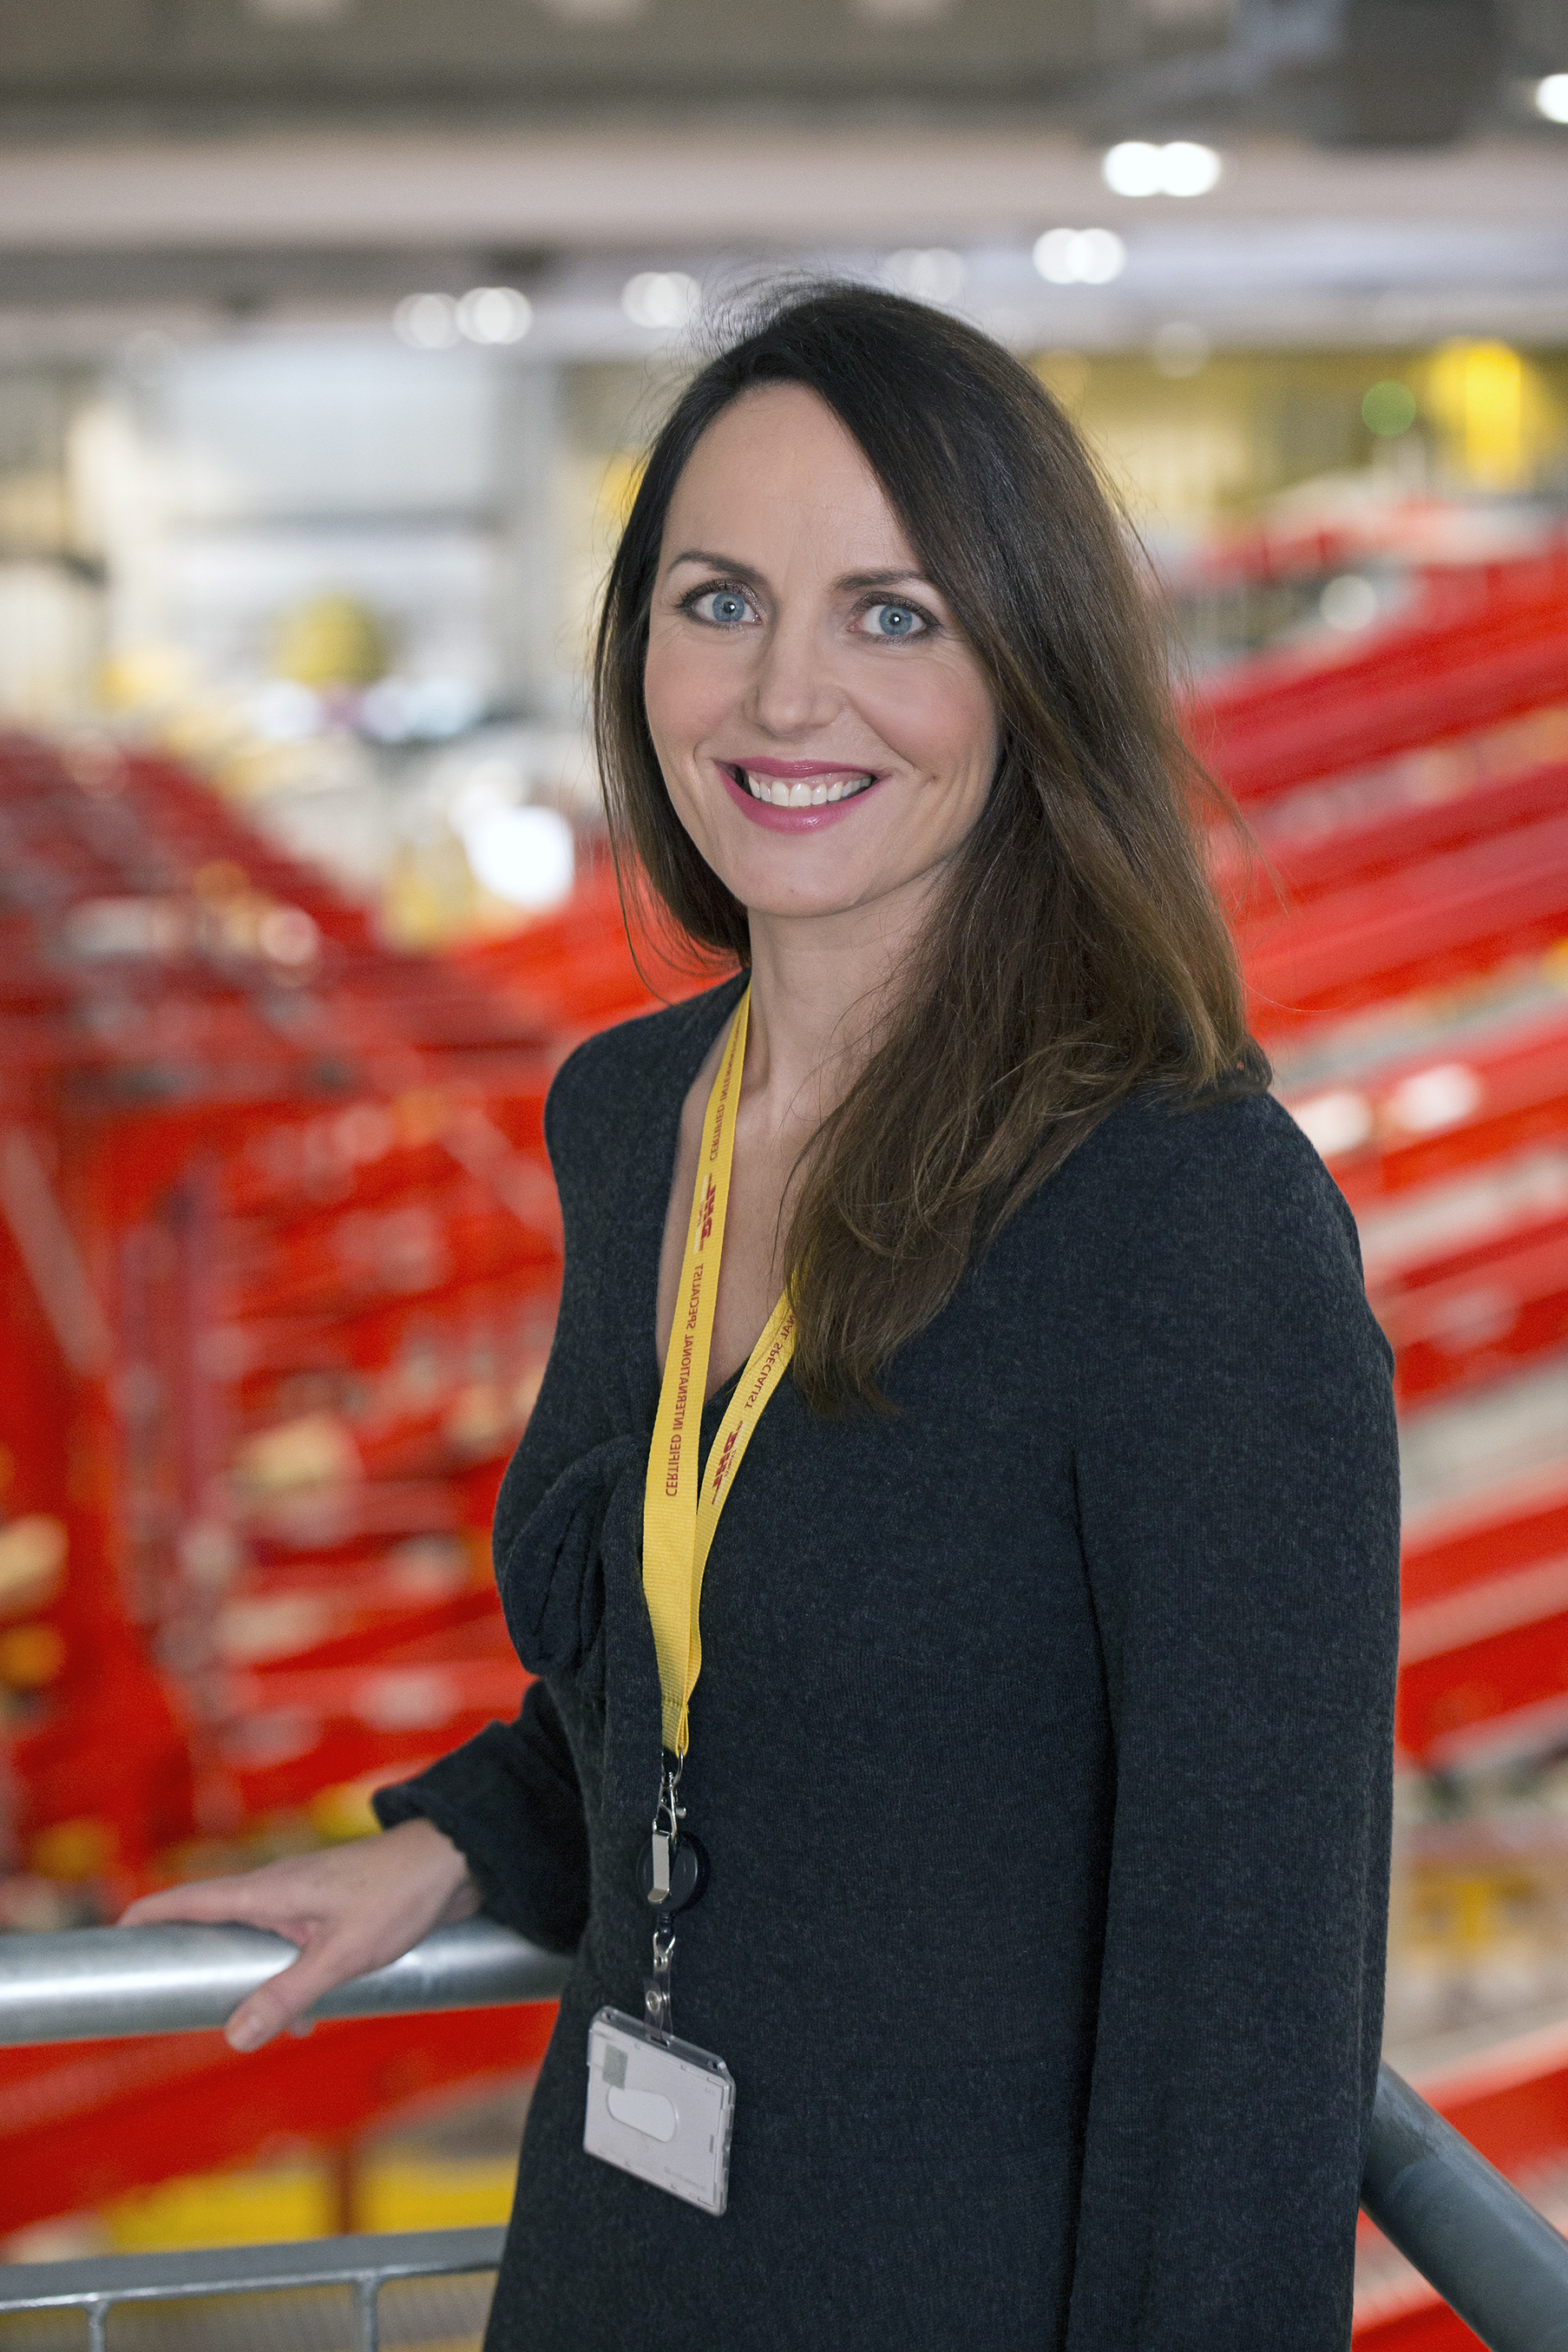 DHL: Promoting Diversity and Helping SMEs